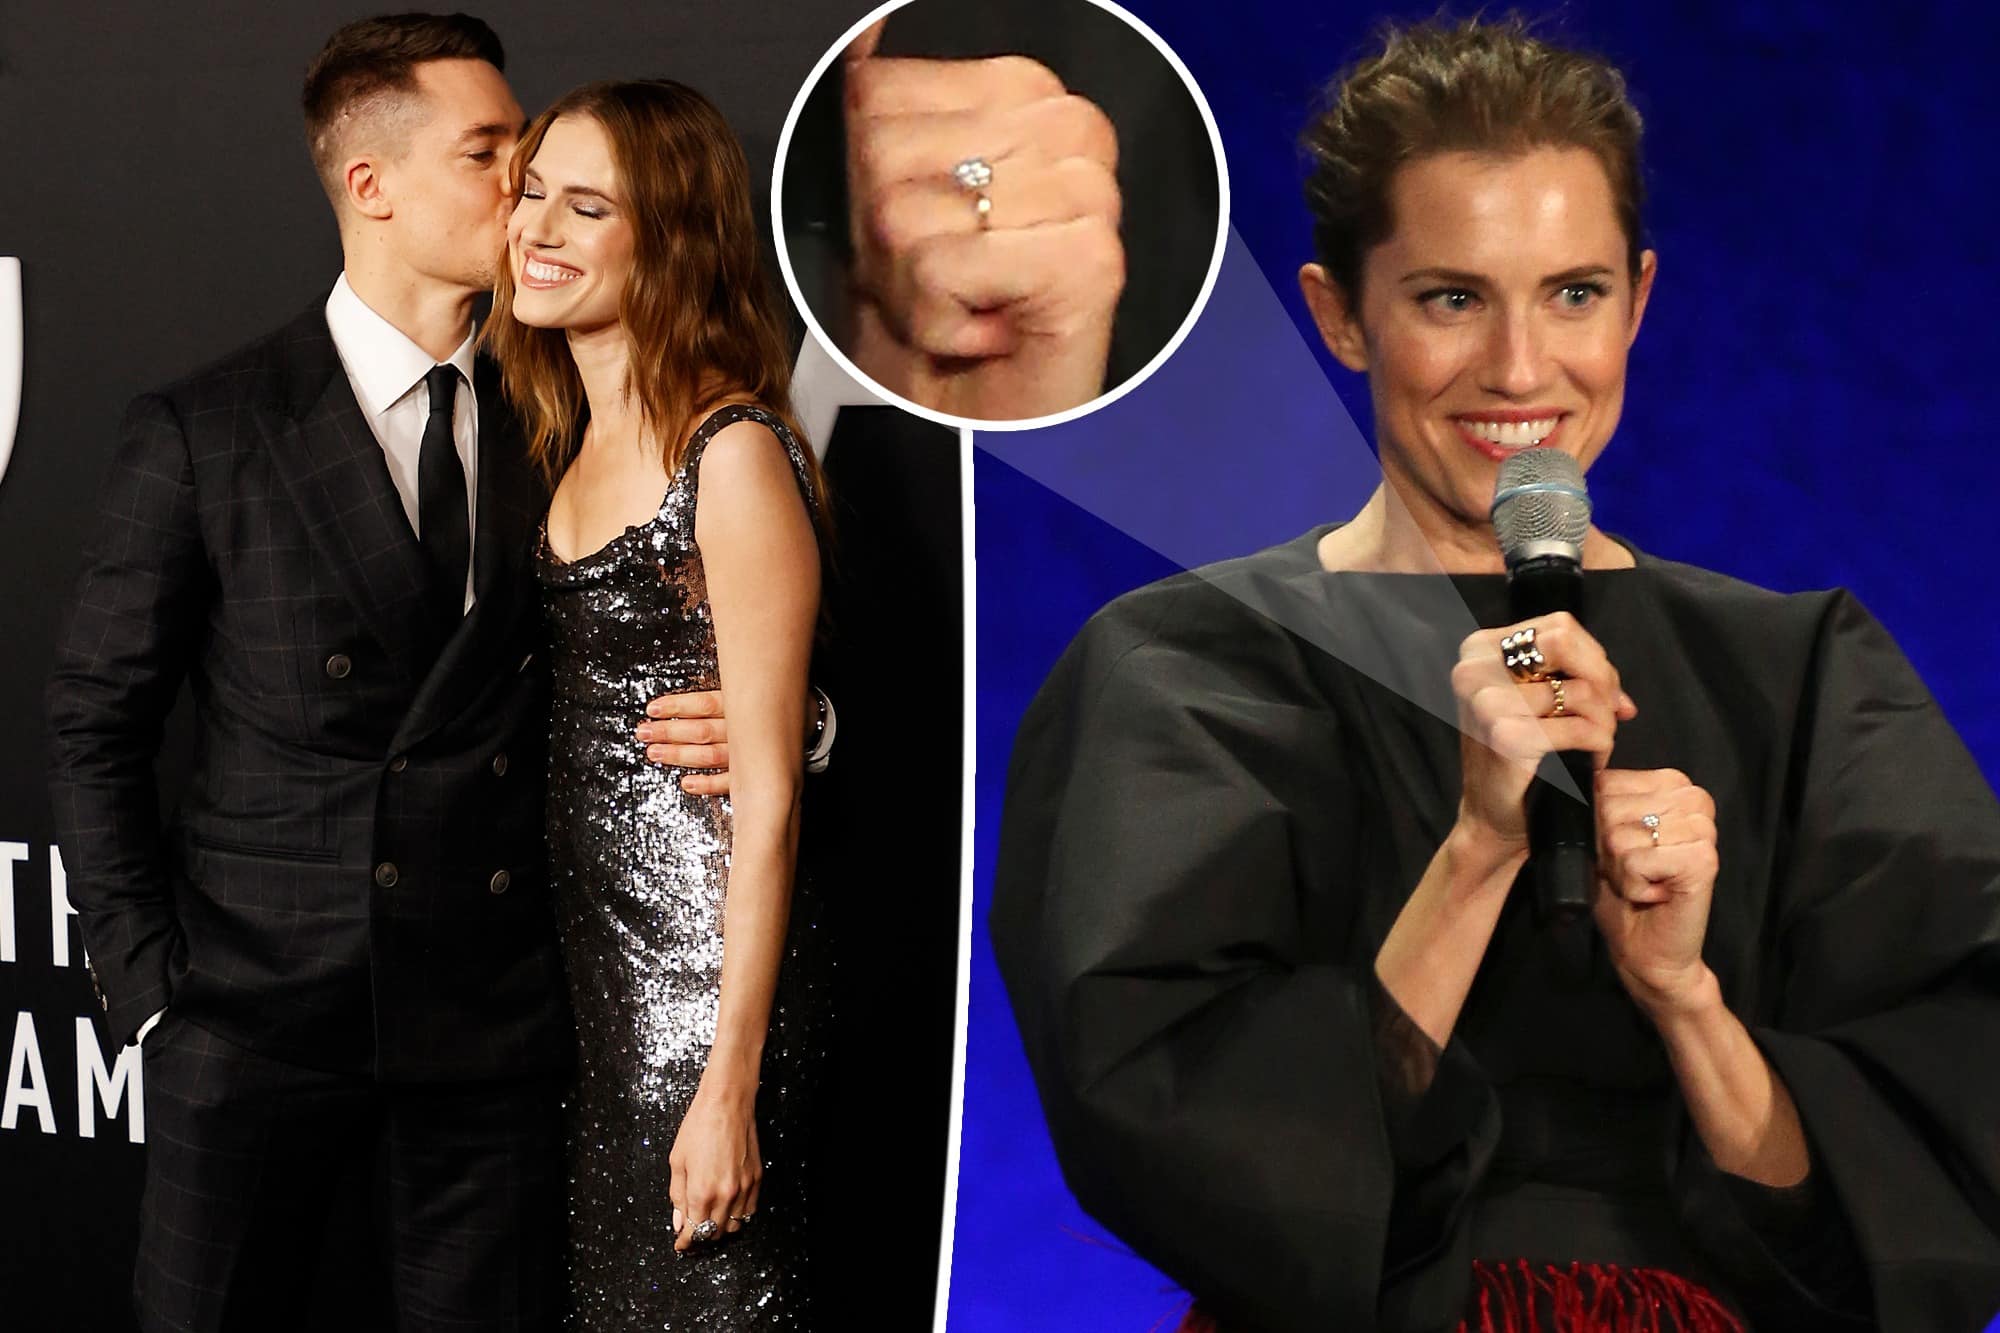 Allison Williams and Alexander Dreymon are engaged